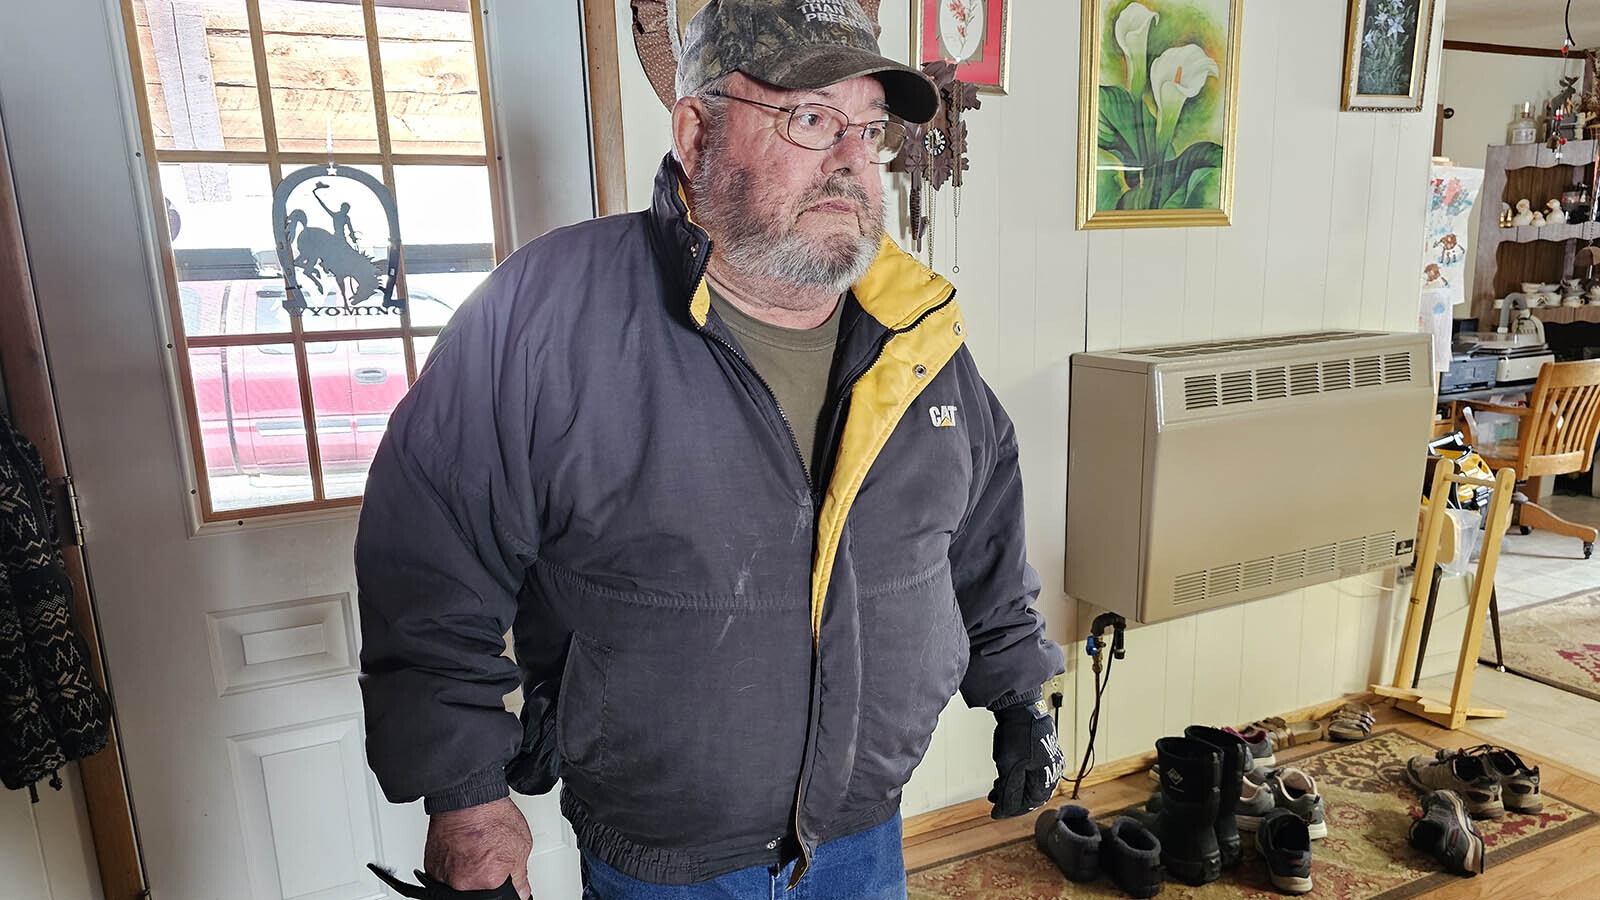 Richard Pearson, who identifies himself as the oldest lifelong resident of the Hoback Basin valley.